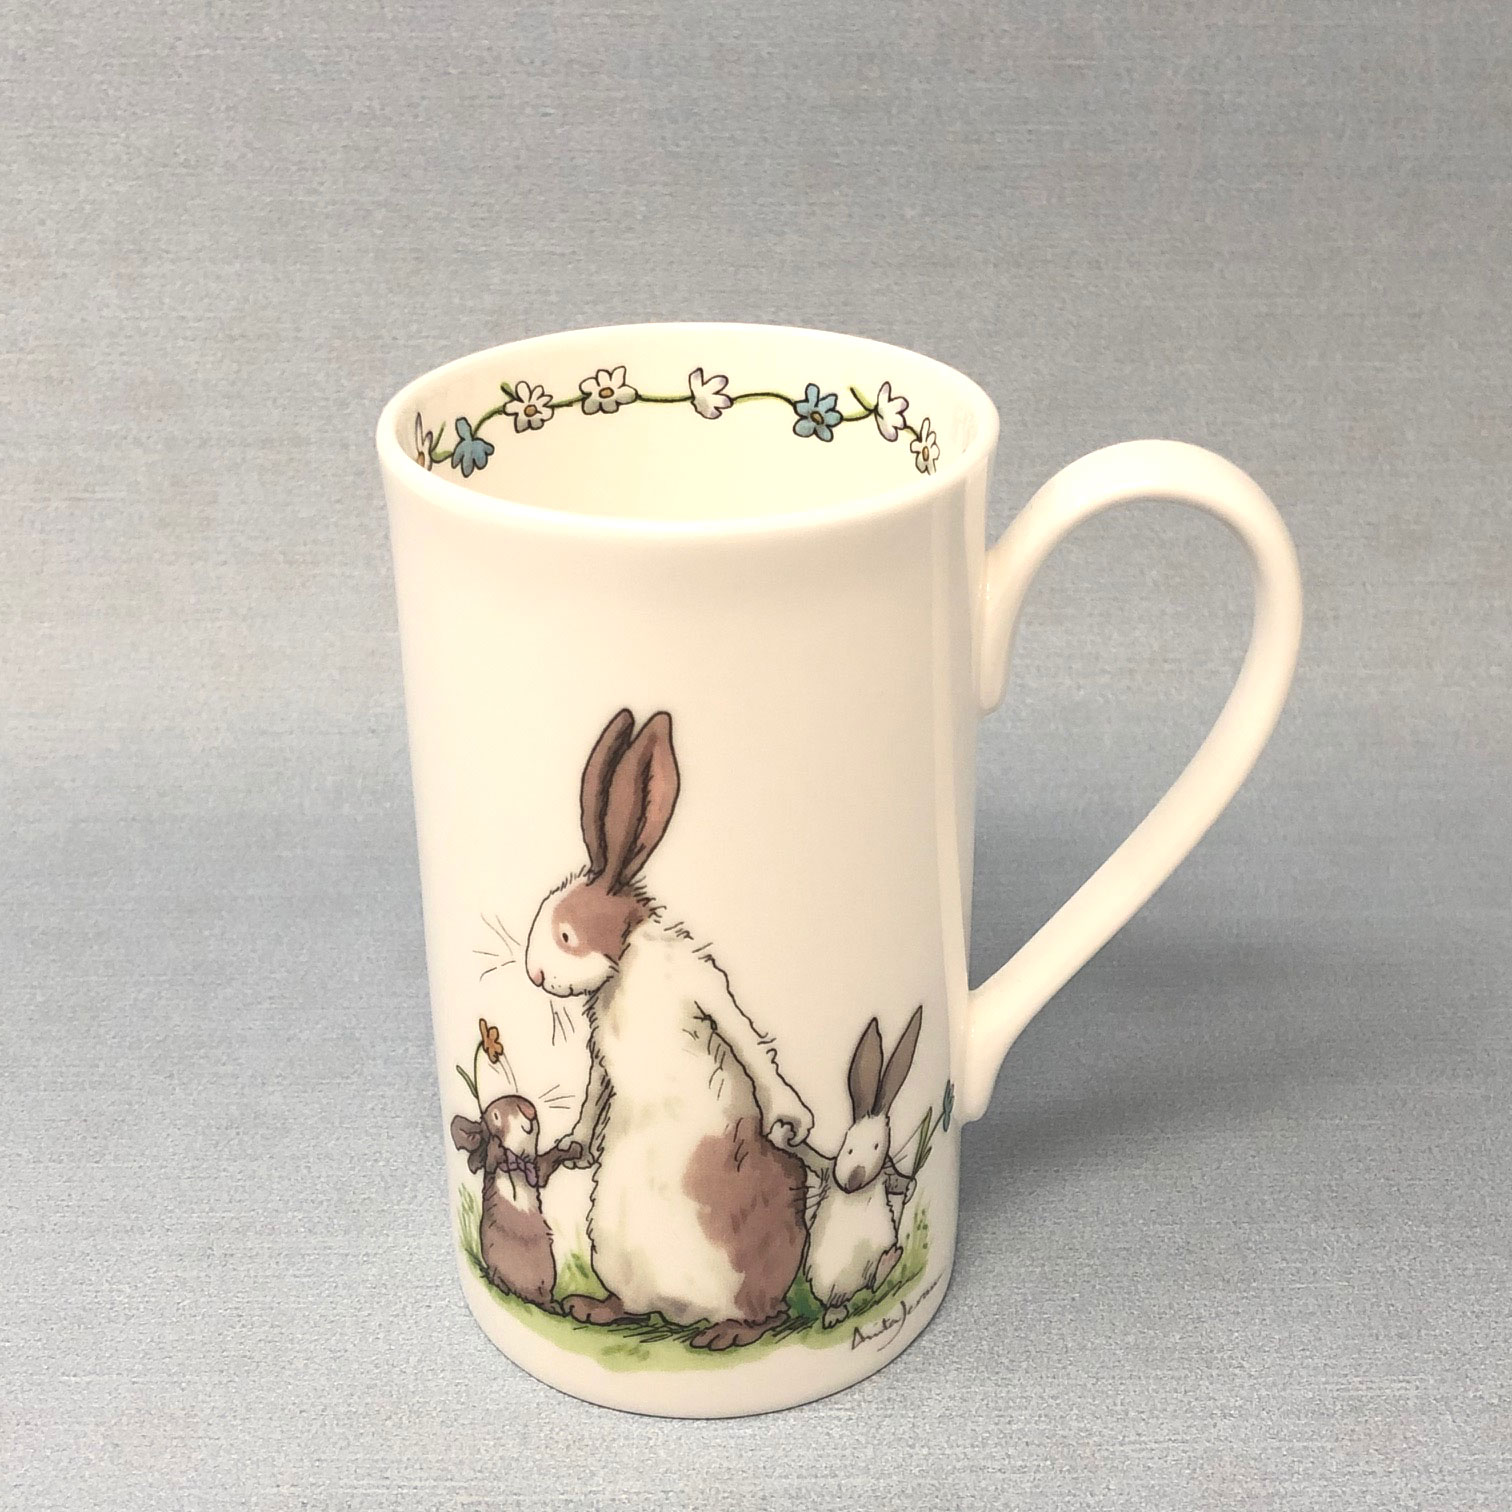 Two Bad Mice Becher hoch "I Picked This for You", 300 ml by Anita Jeram, Hasen, Ostern